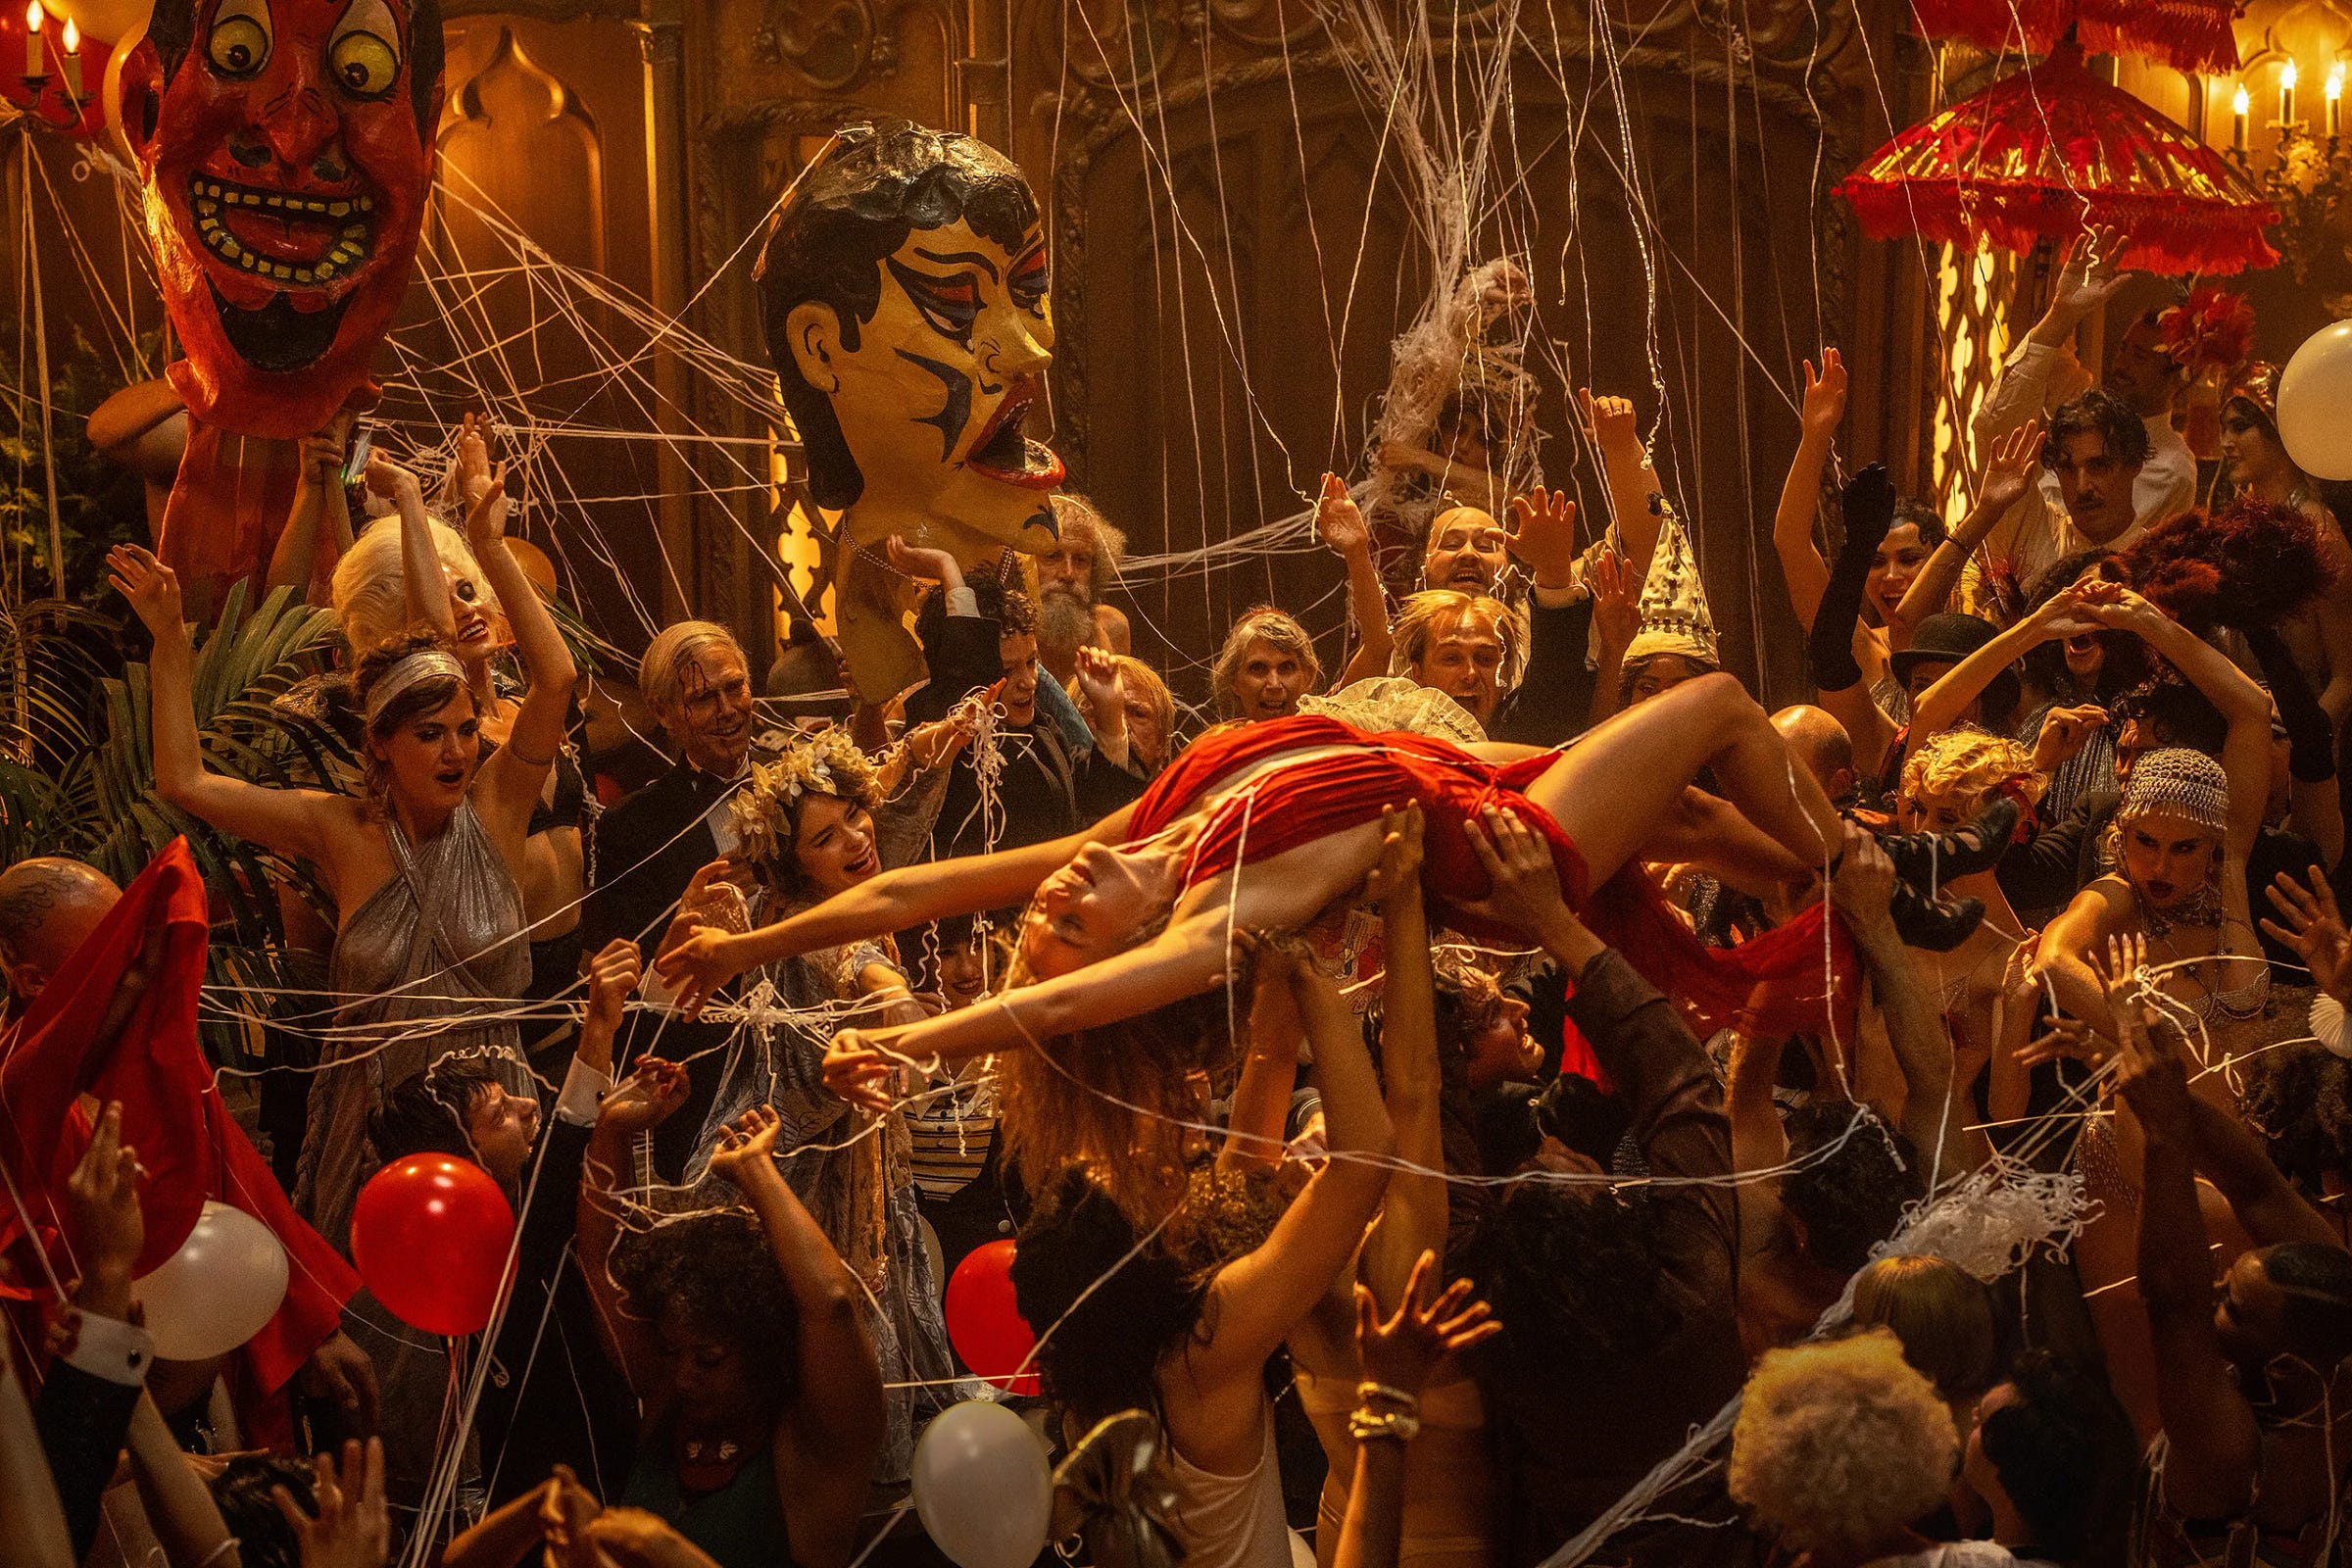 Margot Robbie as Nellie LaRoy, crowd surfing through a party in a red dress, and surrounded by revelers.